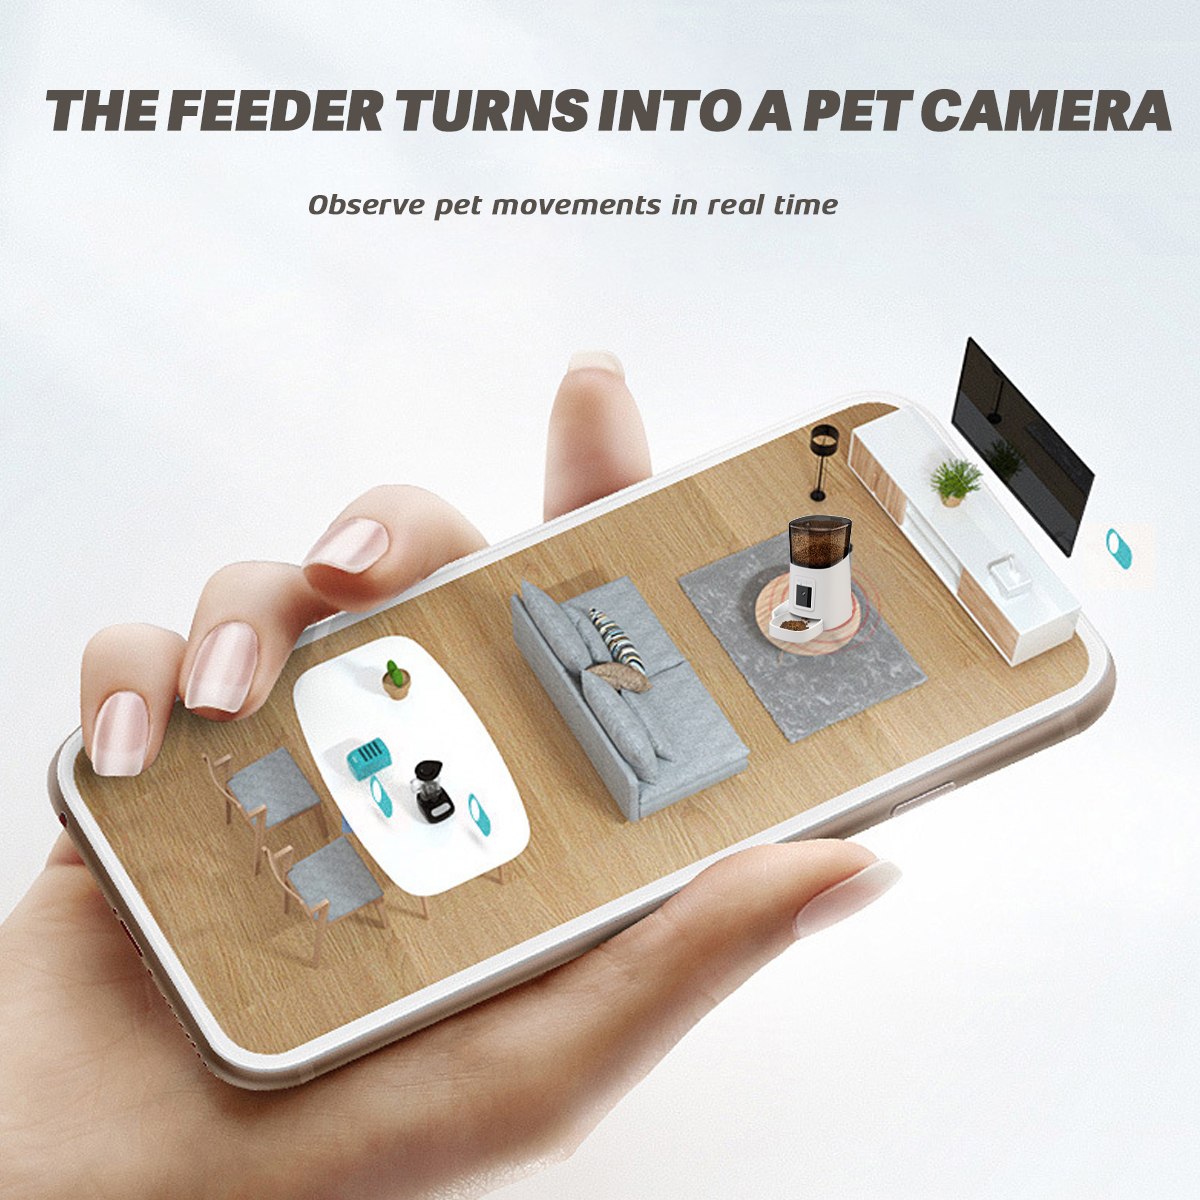 6L-Remote-Visibility-Pet-Feeder-Timing-Automatic-For-Cats-Dogs-WiFi-Intelligent-Swirl-Smart-Food-Dis-1957203-7